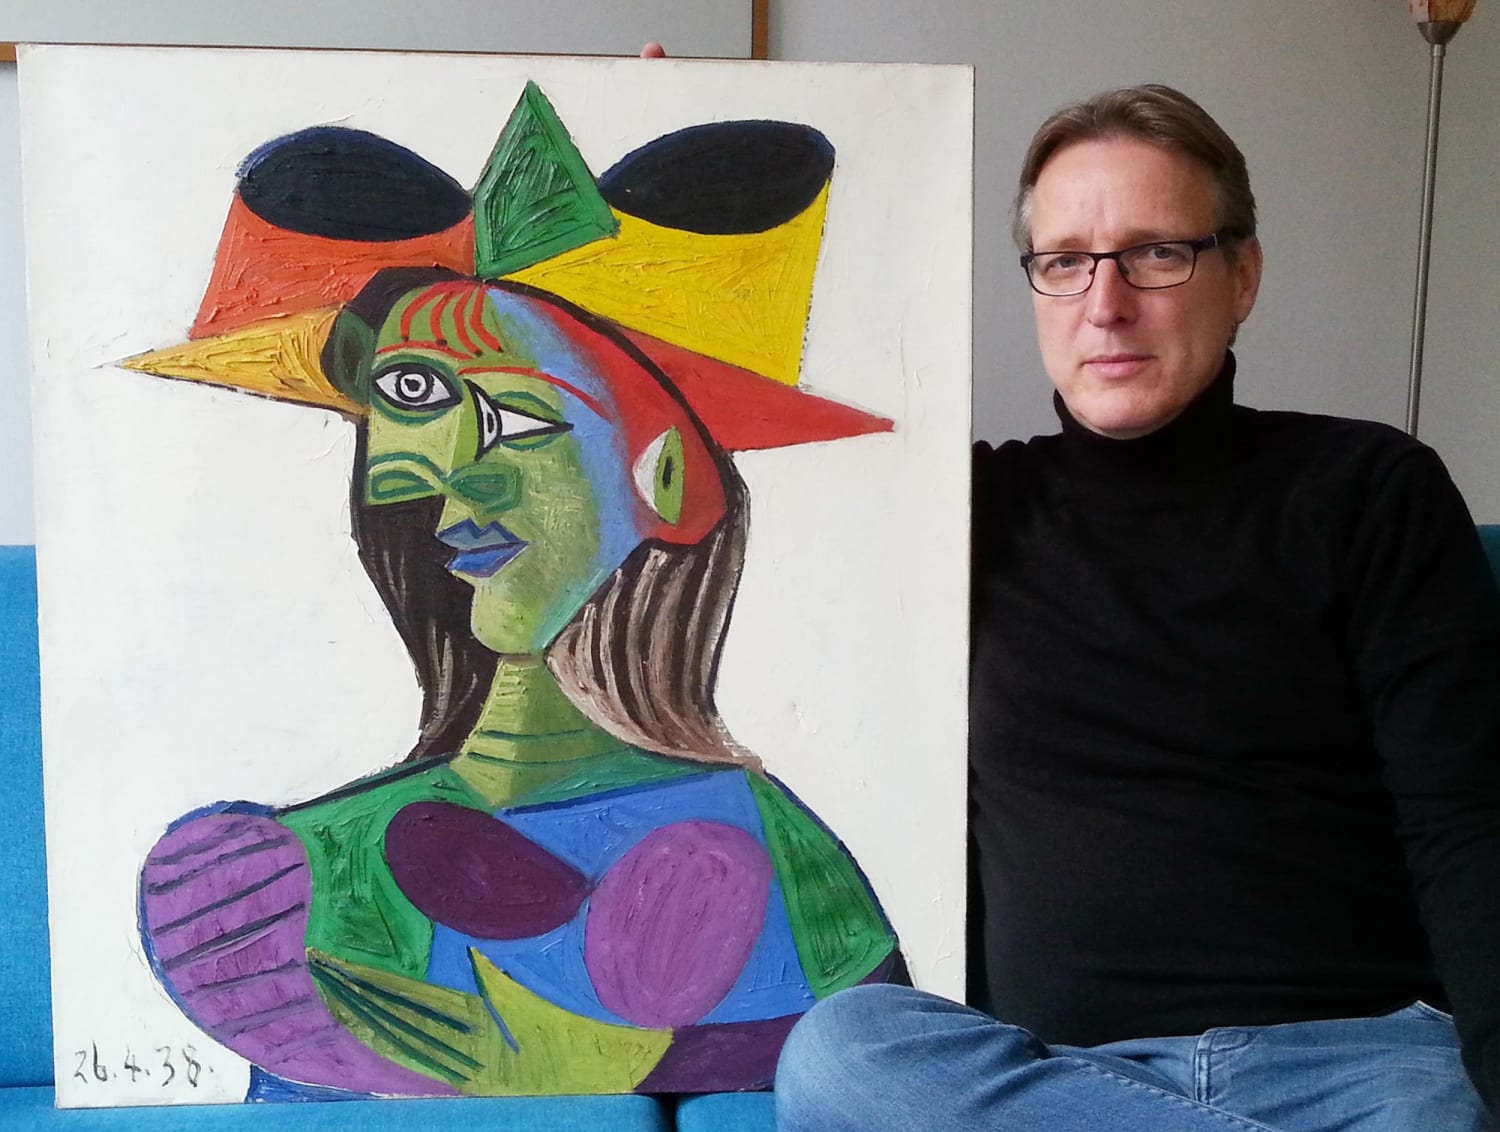 Picasso painting stolen 12 years ago found by